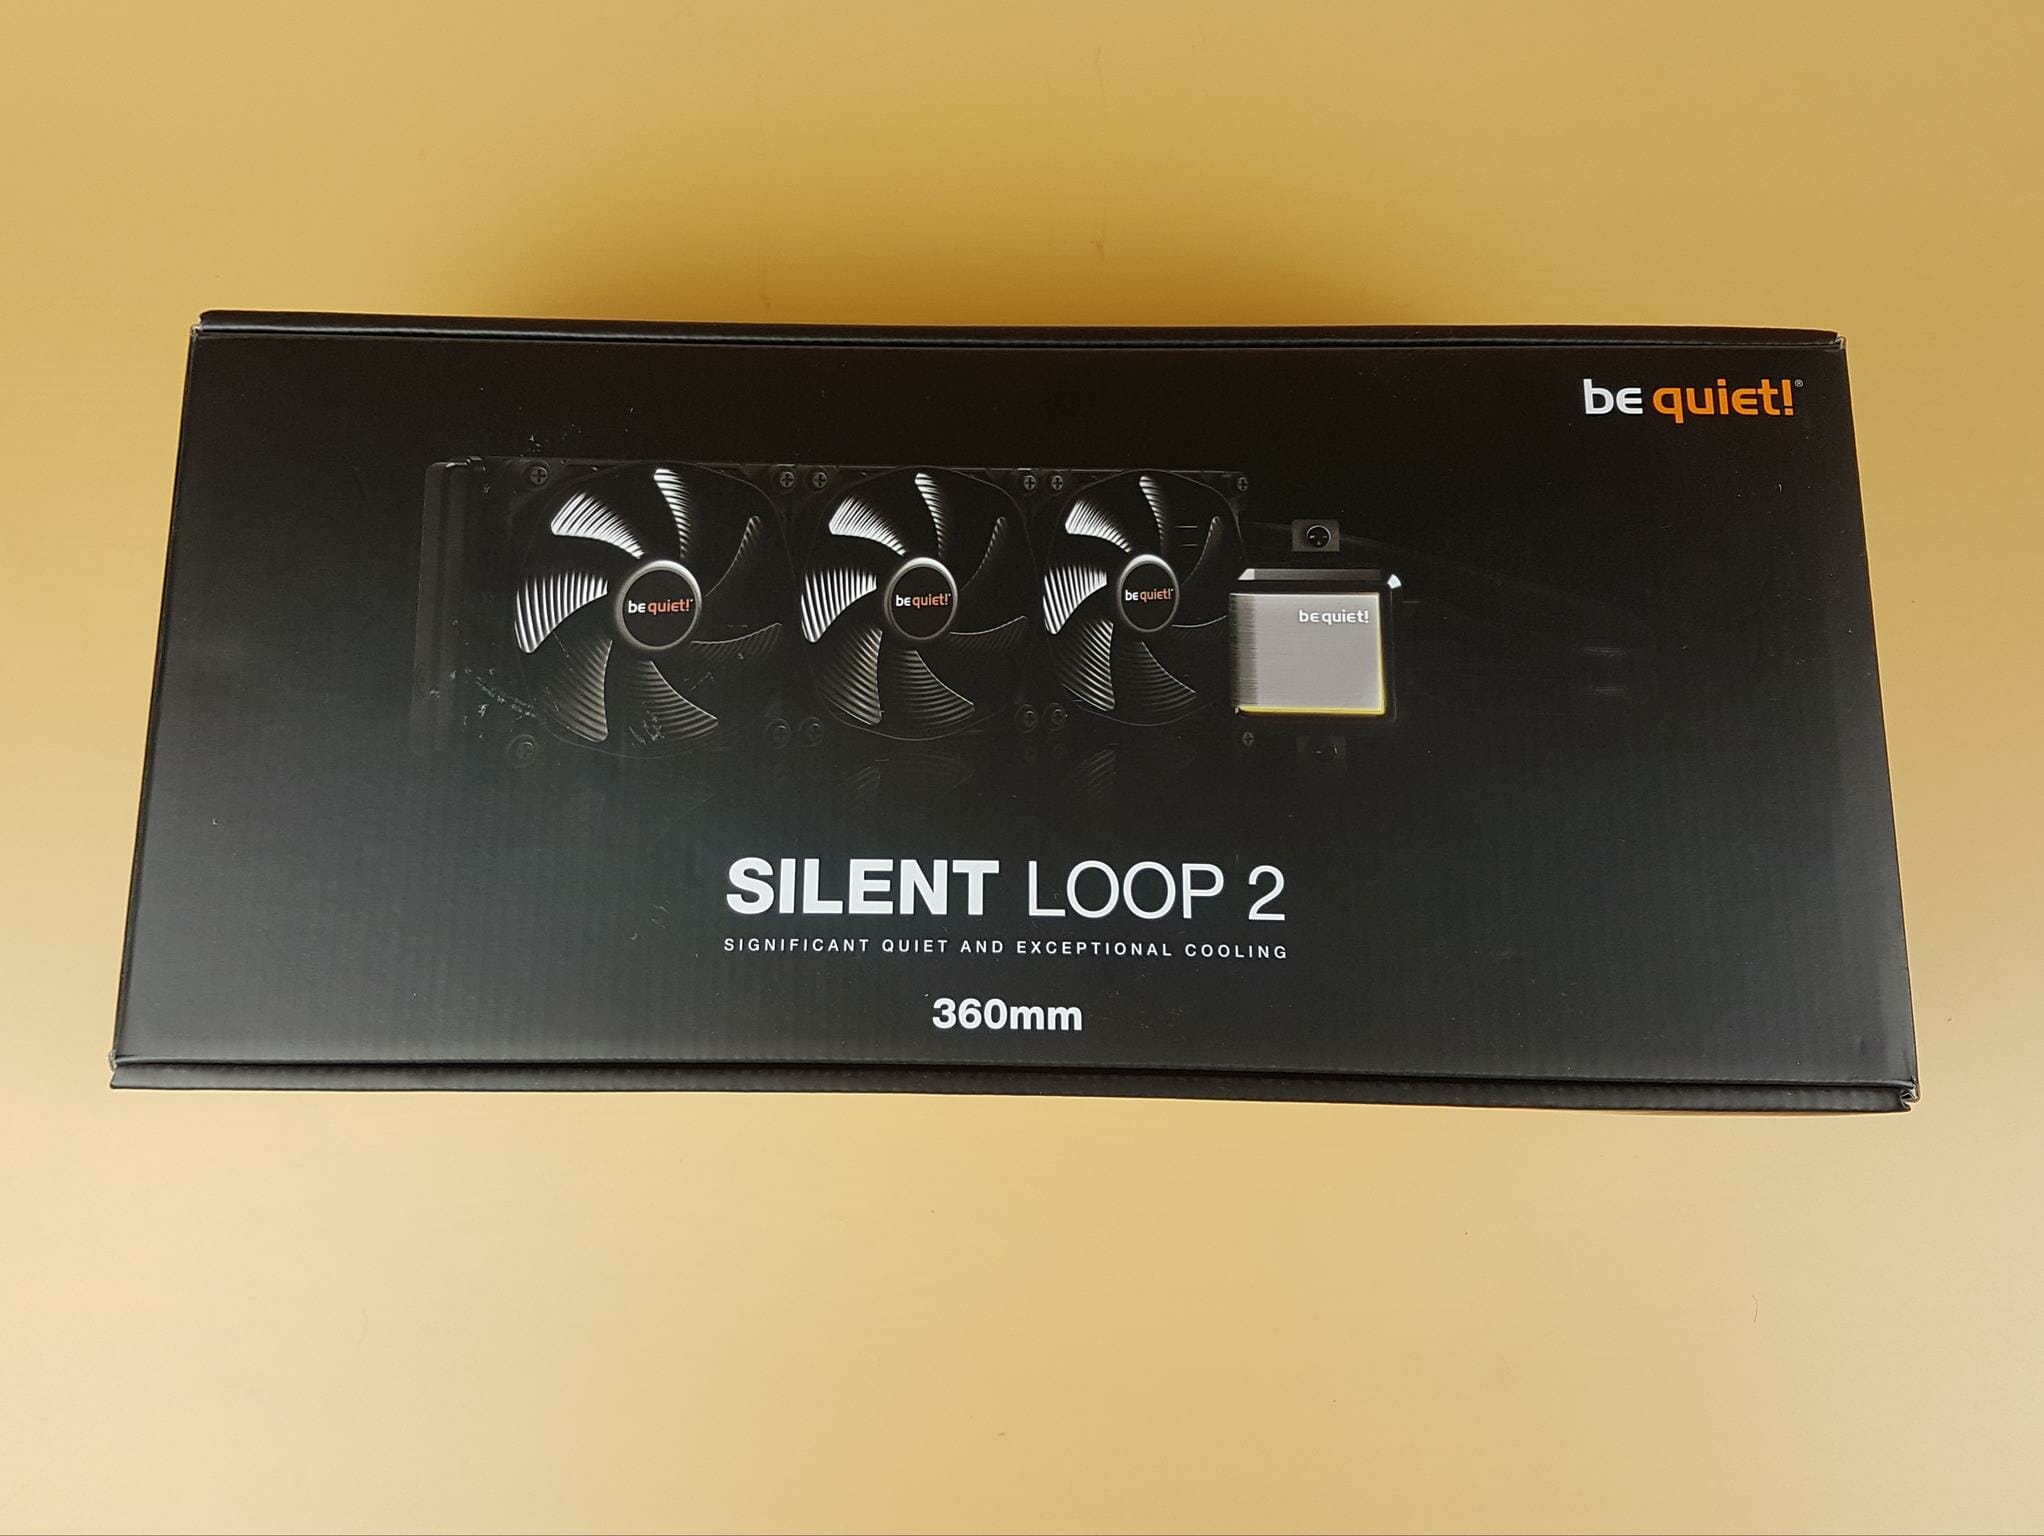 be quiet! Silent Loop 2 360 AIO Specifications box